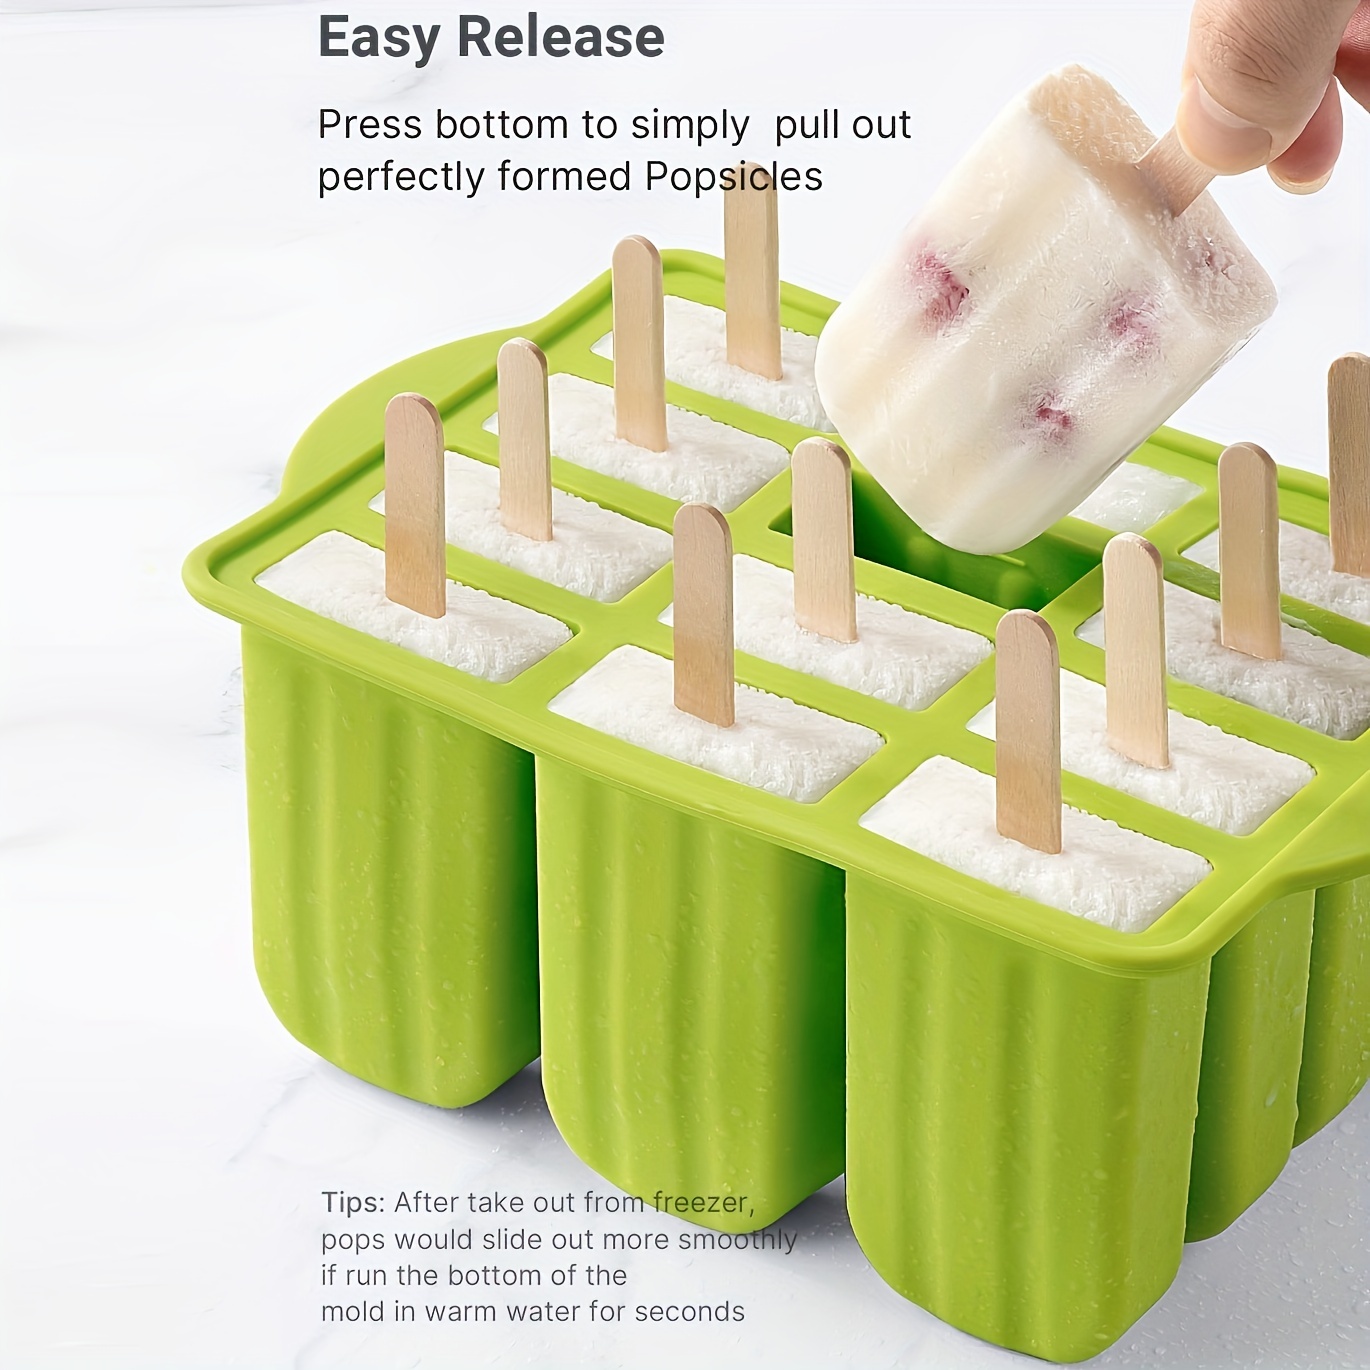 Popsicle Molds, 6 Pack Silicone Popsicle Molds Reusable Popsicle